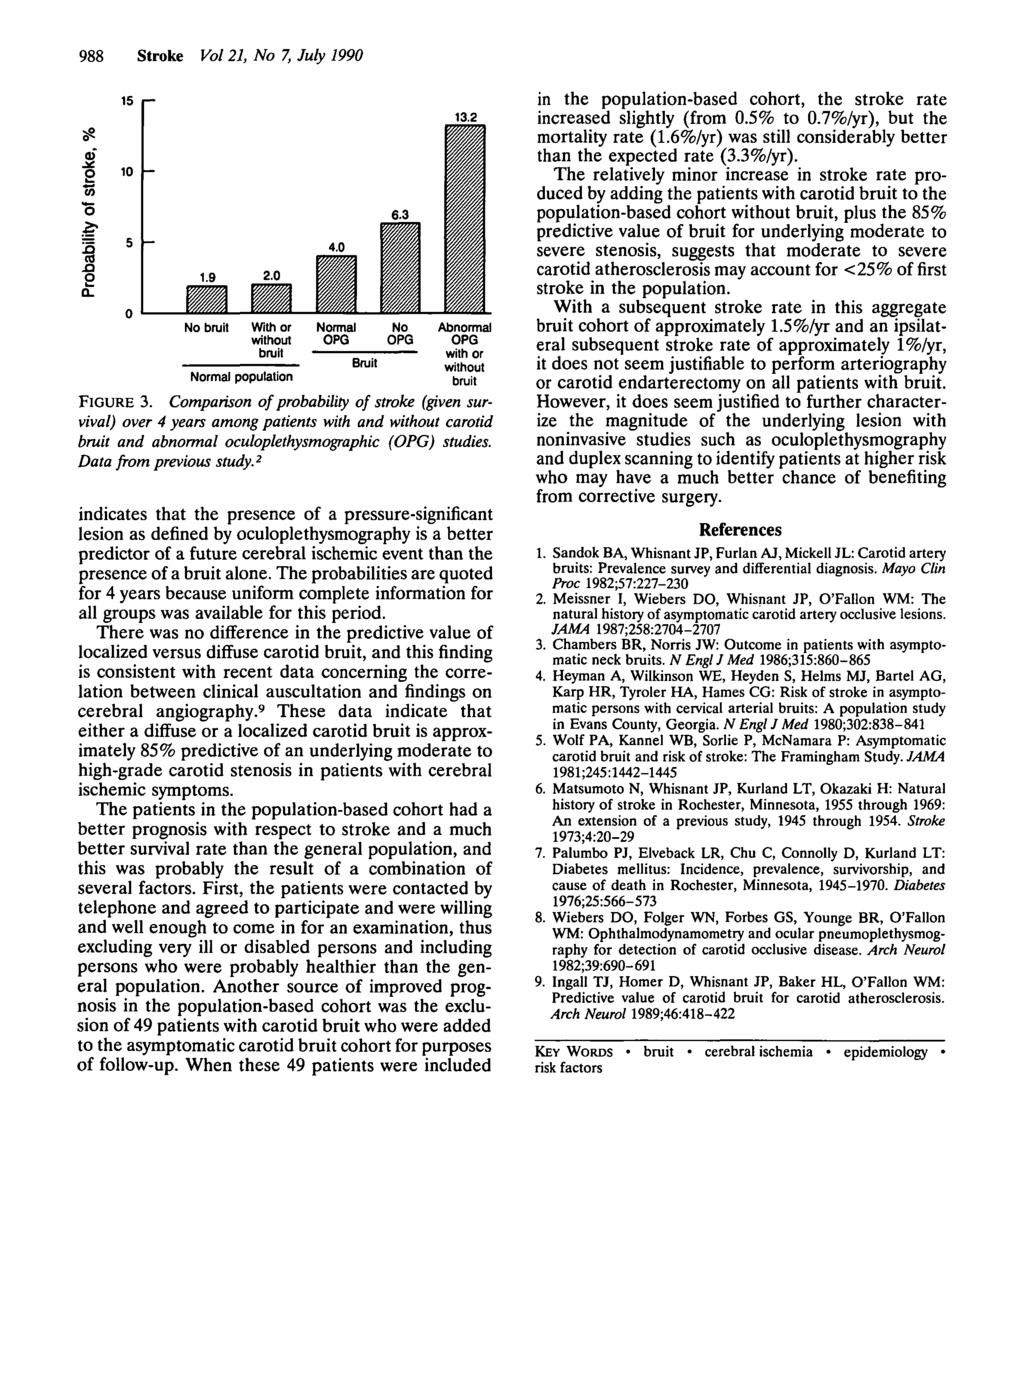 Downloaded from http://ahajournals.org by on January 8, 9 988 Stroke Vol, No 7, July 99 as "o. a. 5 5. 6.3 3.